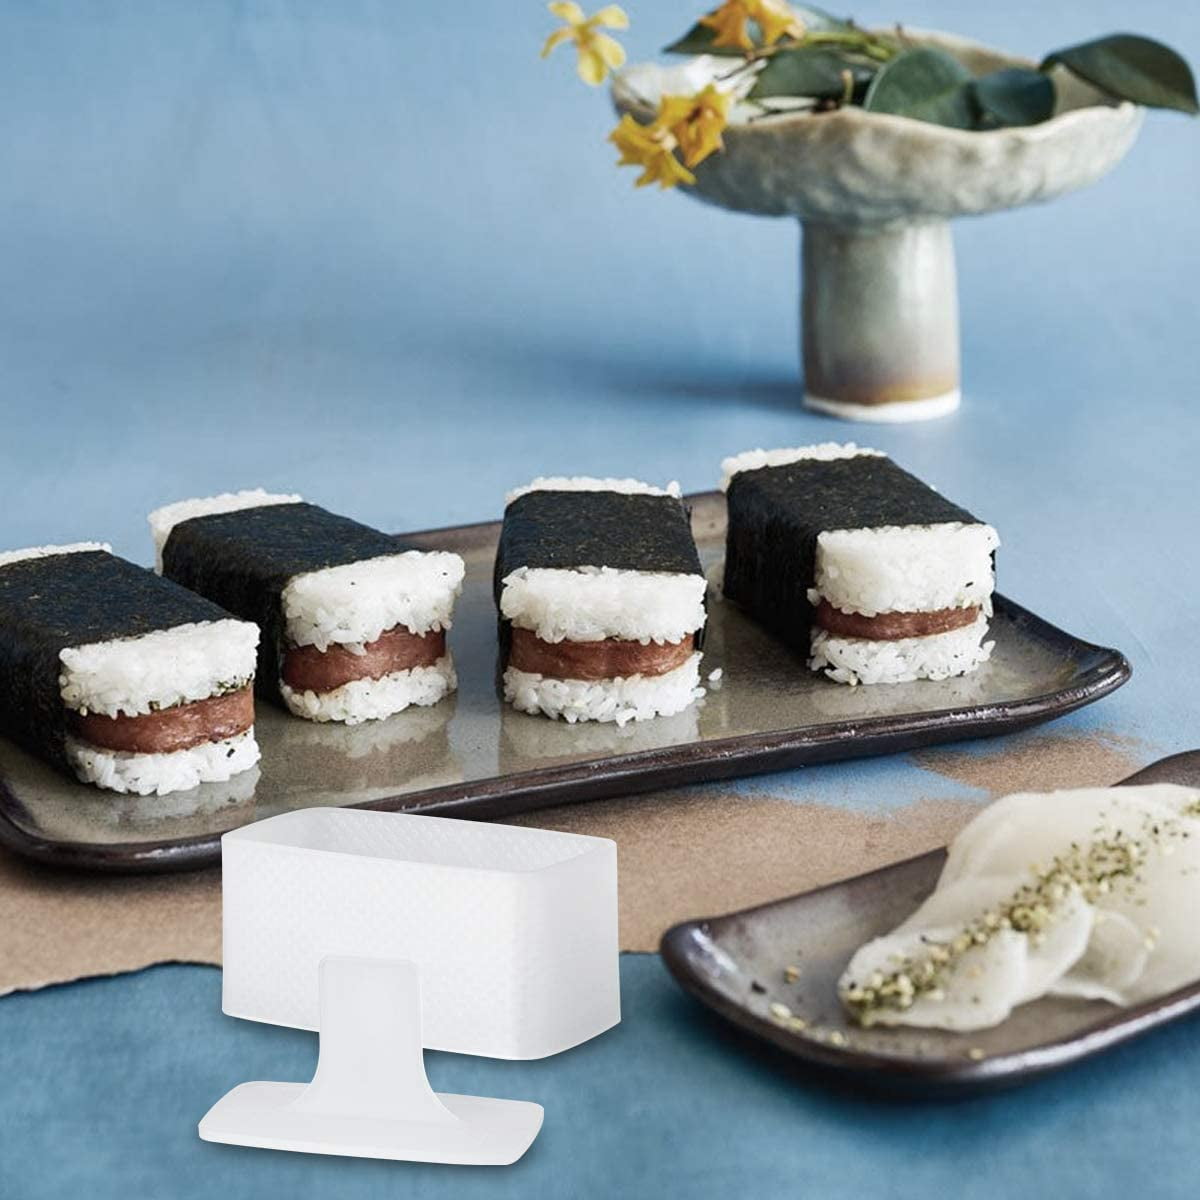 How to Make Spam Musubi : 16 Steps (with Pictures) - Instructables